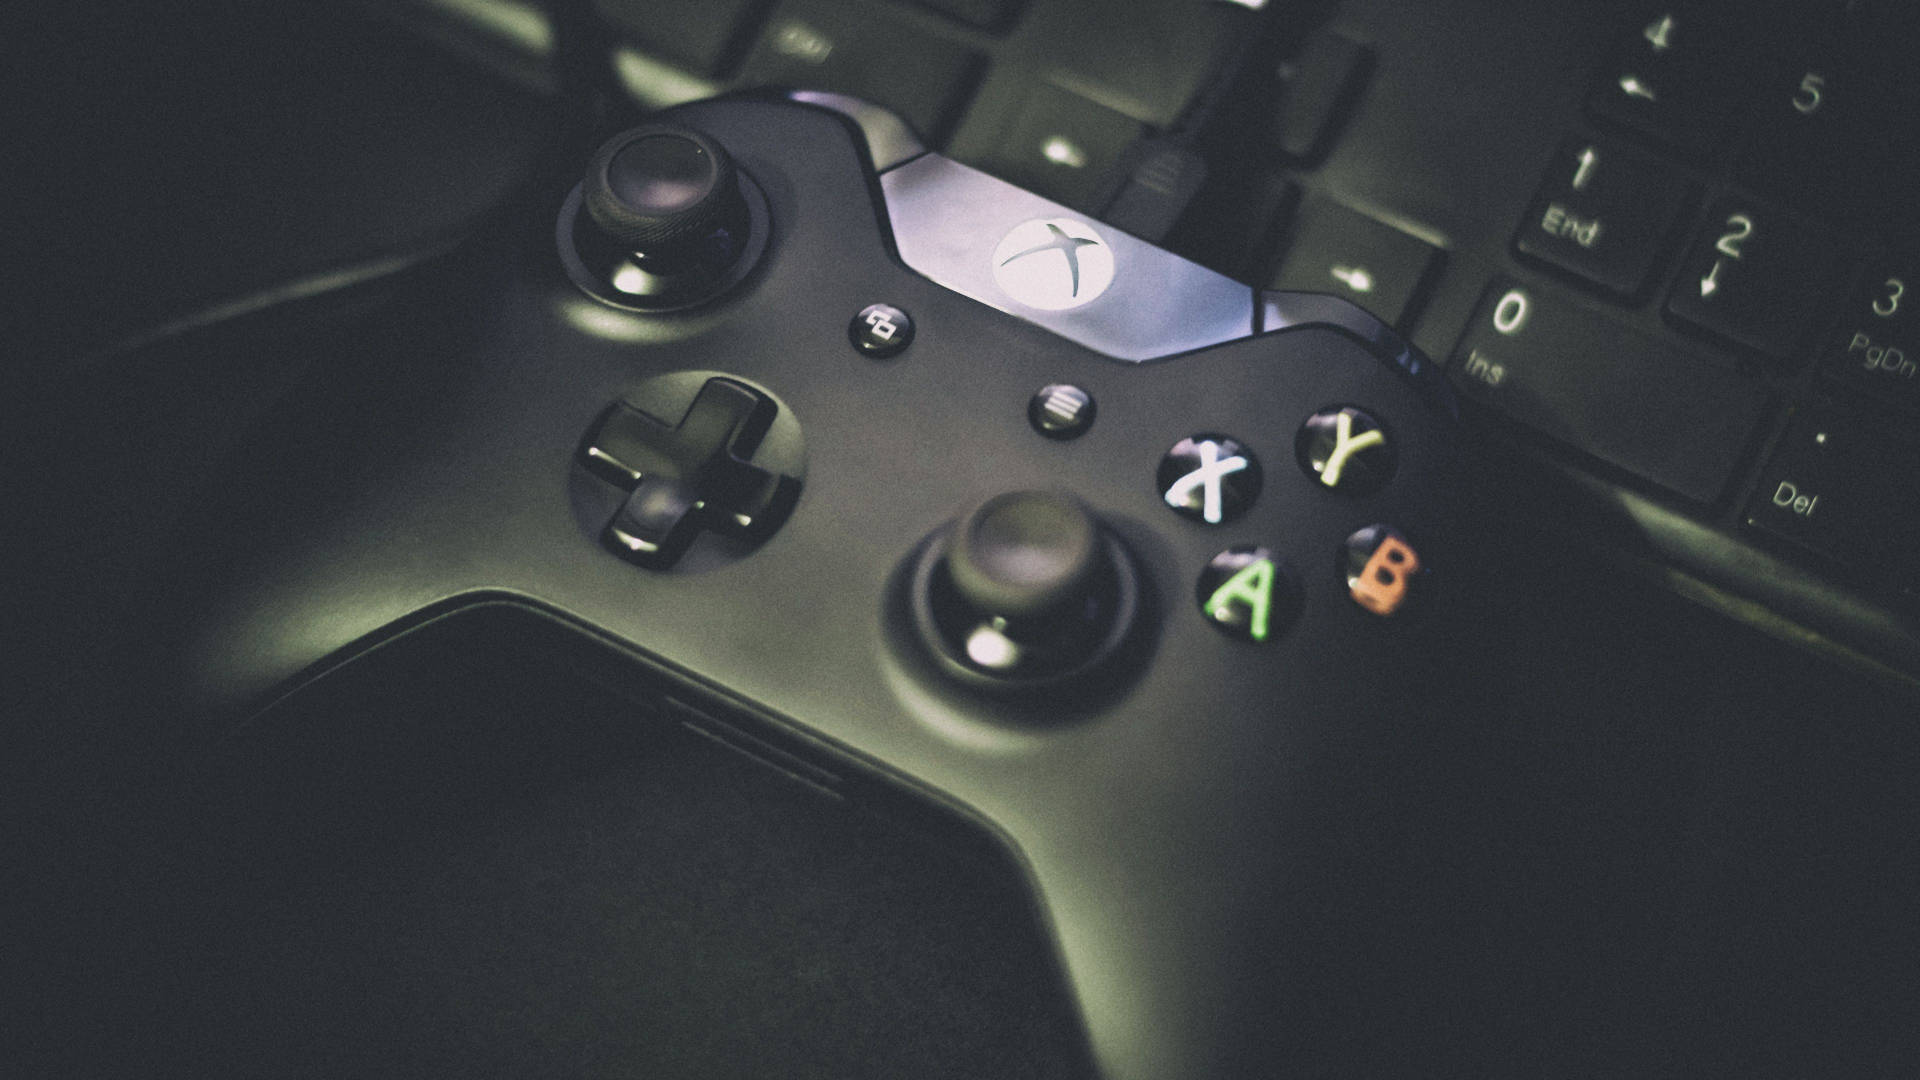 Xbox One Game Pad Background